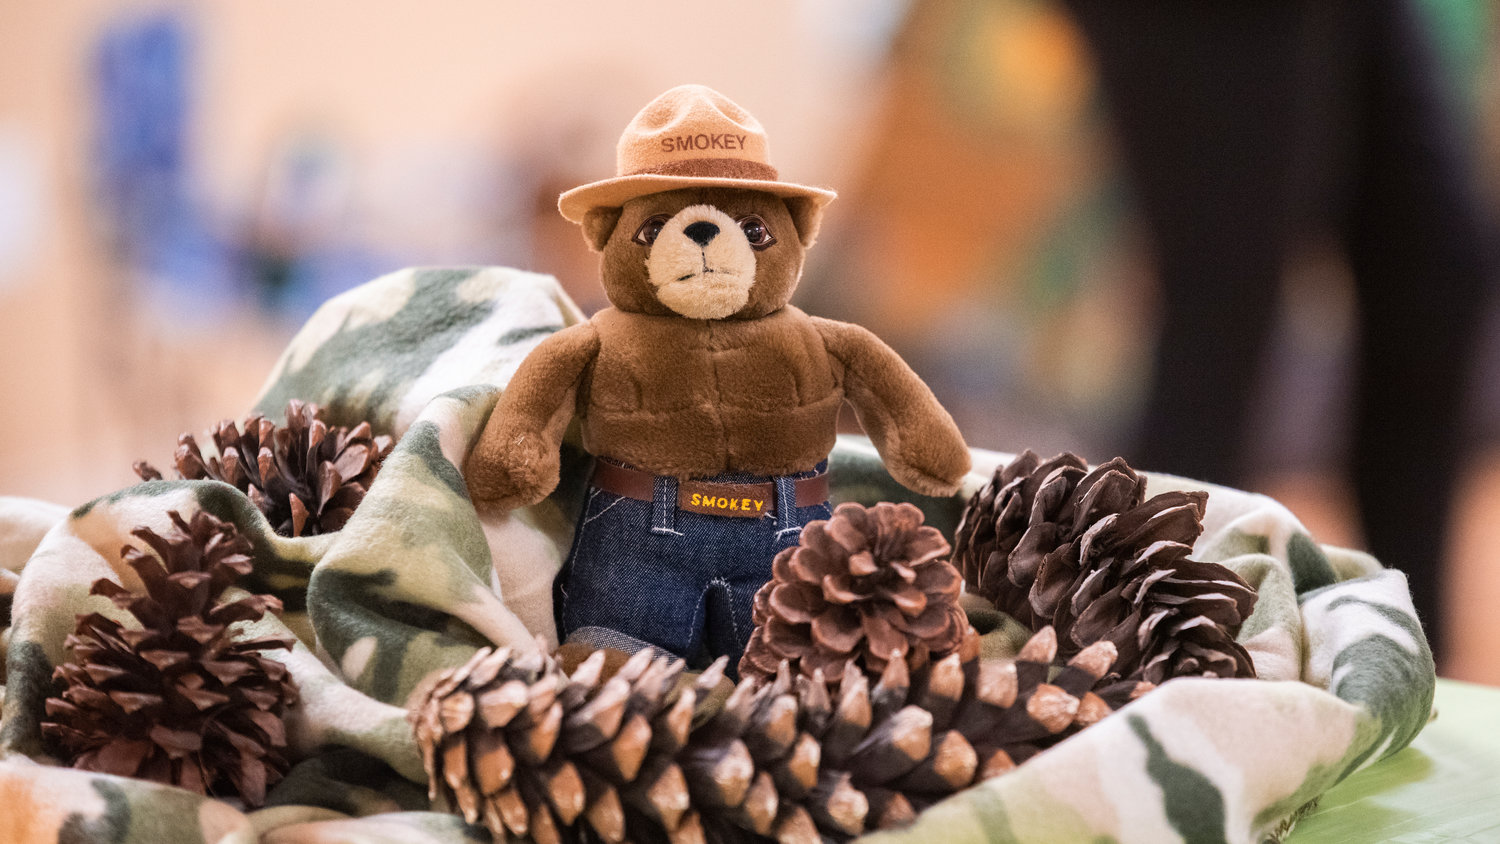 A Smokey the Bear stuffed animal sits on display Thursday night at the Packwood Community Center.